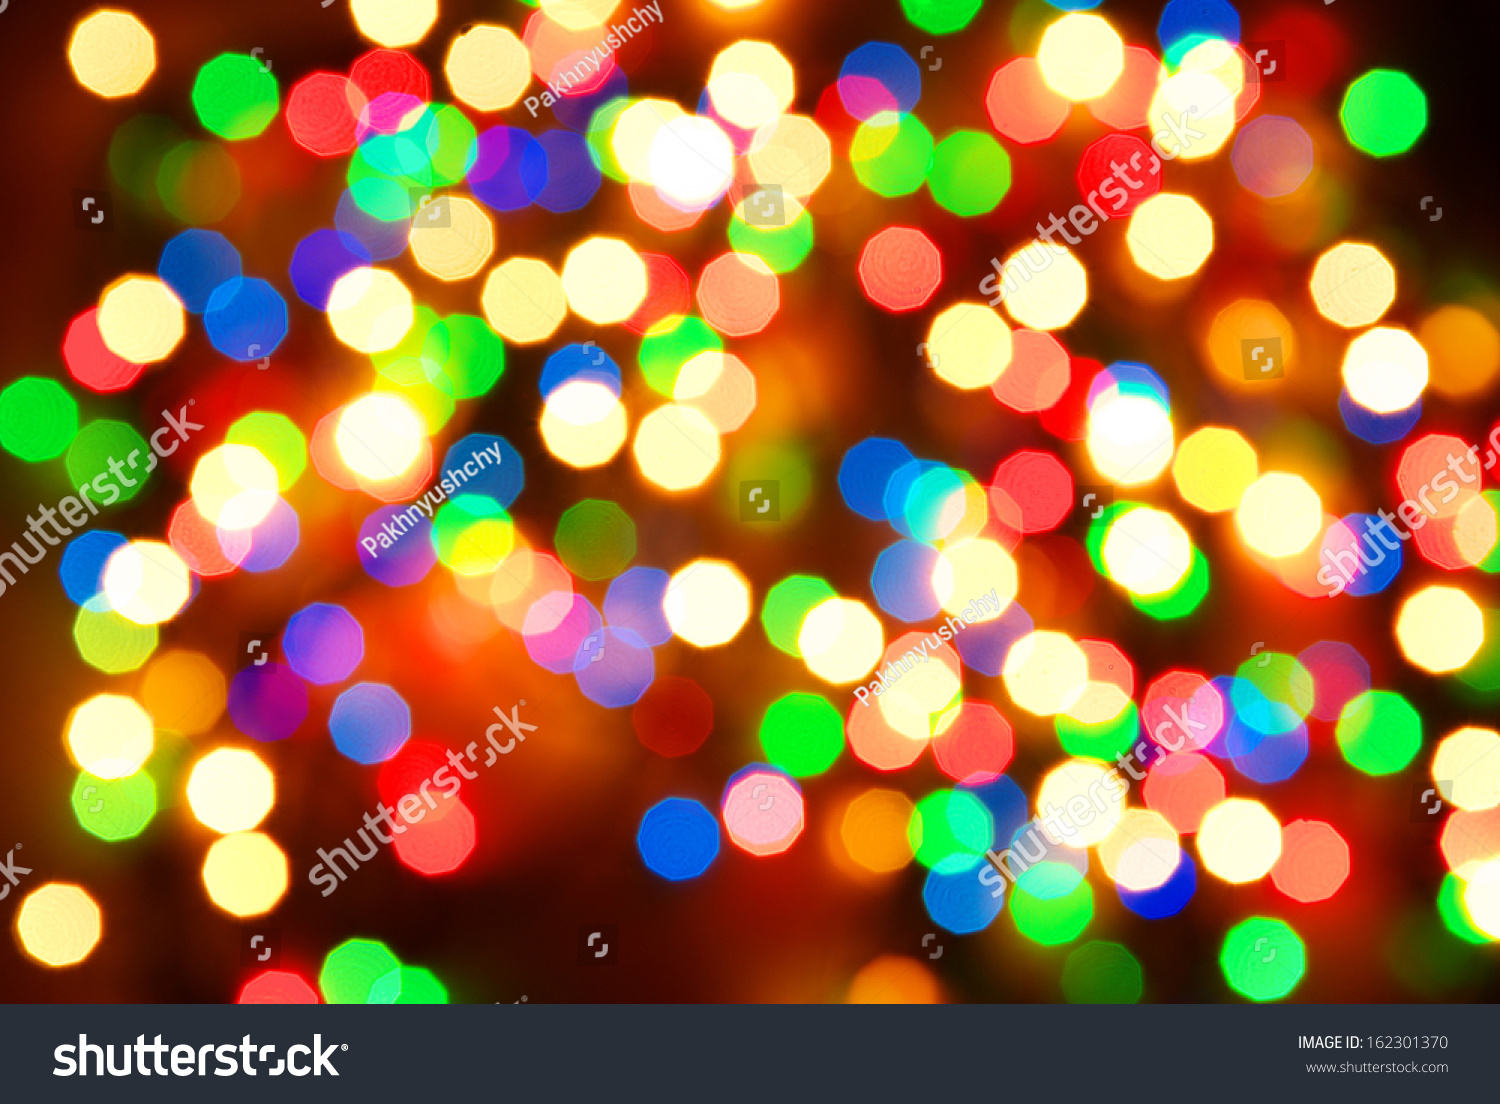 Abstract Christmas Lights Background On Black Stock Photo 162301370 ...